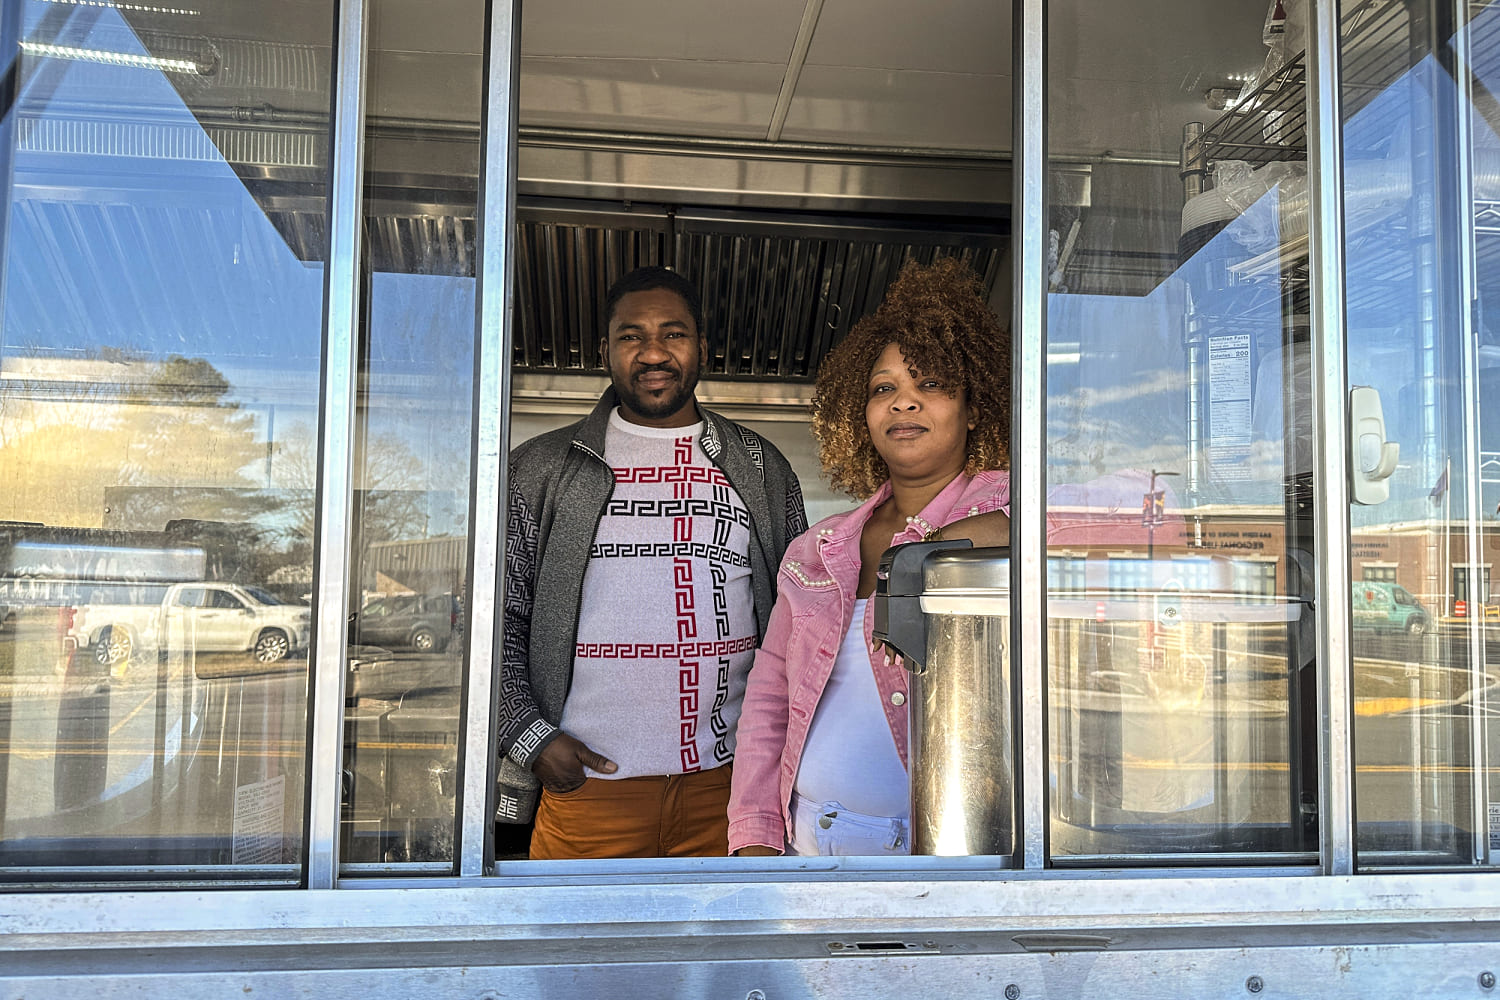 They opened a Haitian food truck, then were told, ‘Go back to your own country,’ lawsuit says